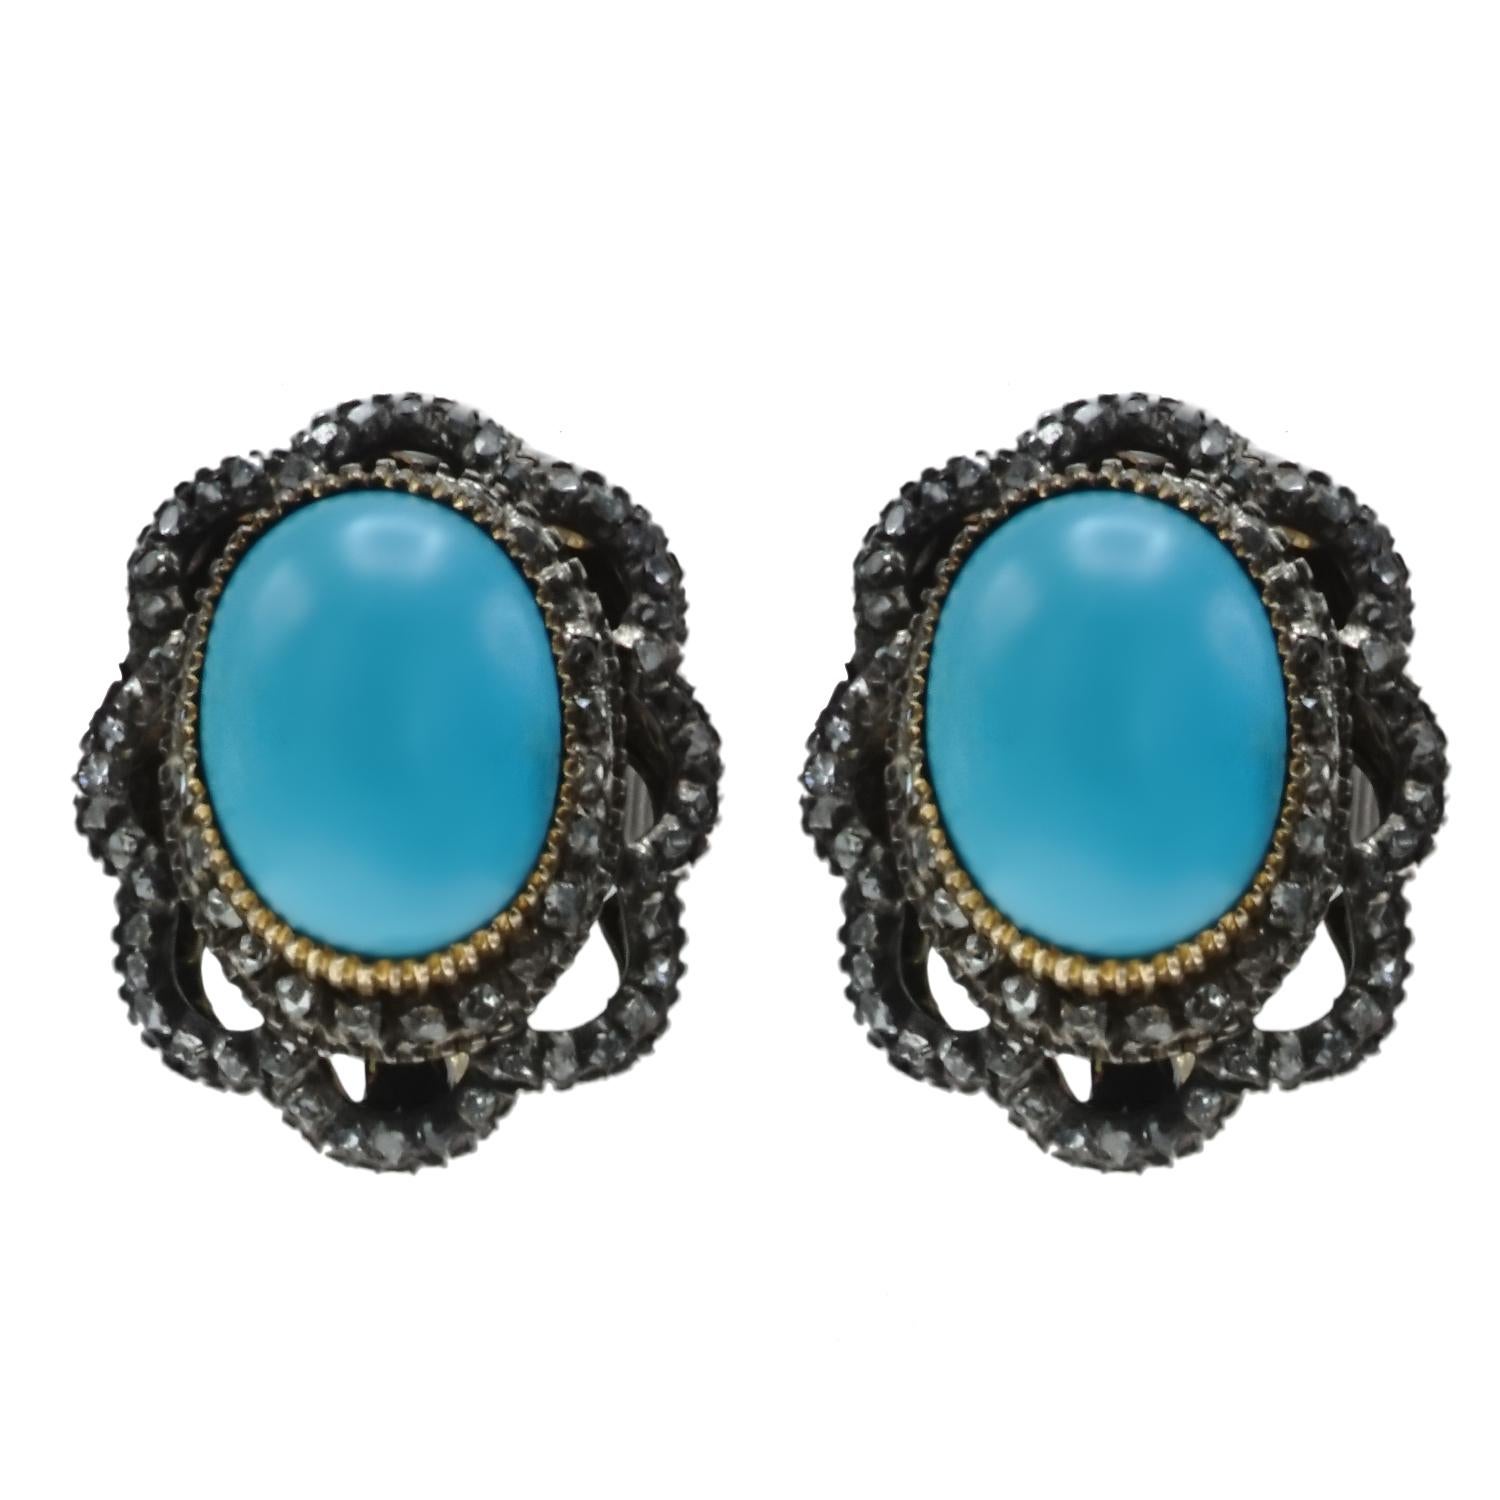 Victorian Persian Turquoise and Diamond Clip-On Earrings